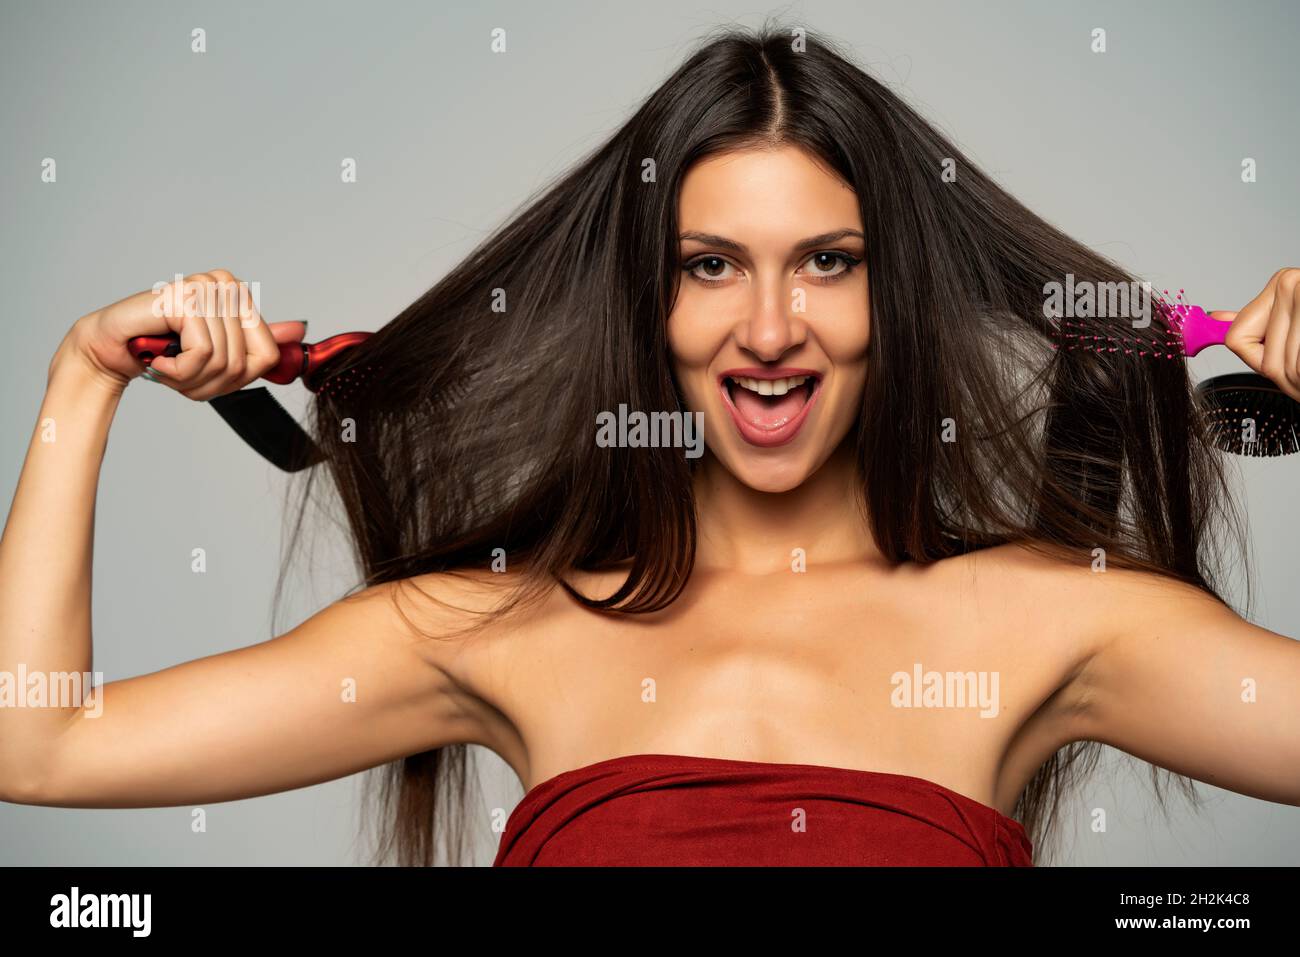 Front View Of Happy Woman Brushing Her Hair With Hair Brushes On Gray